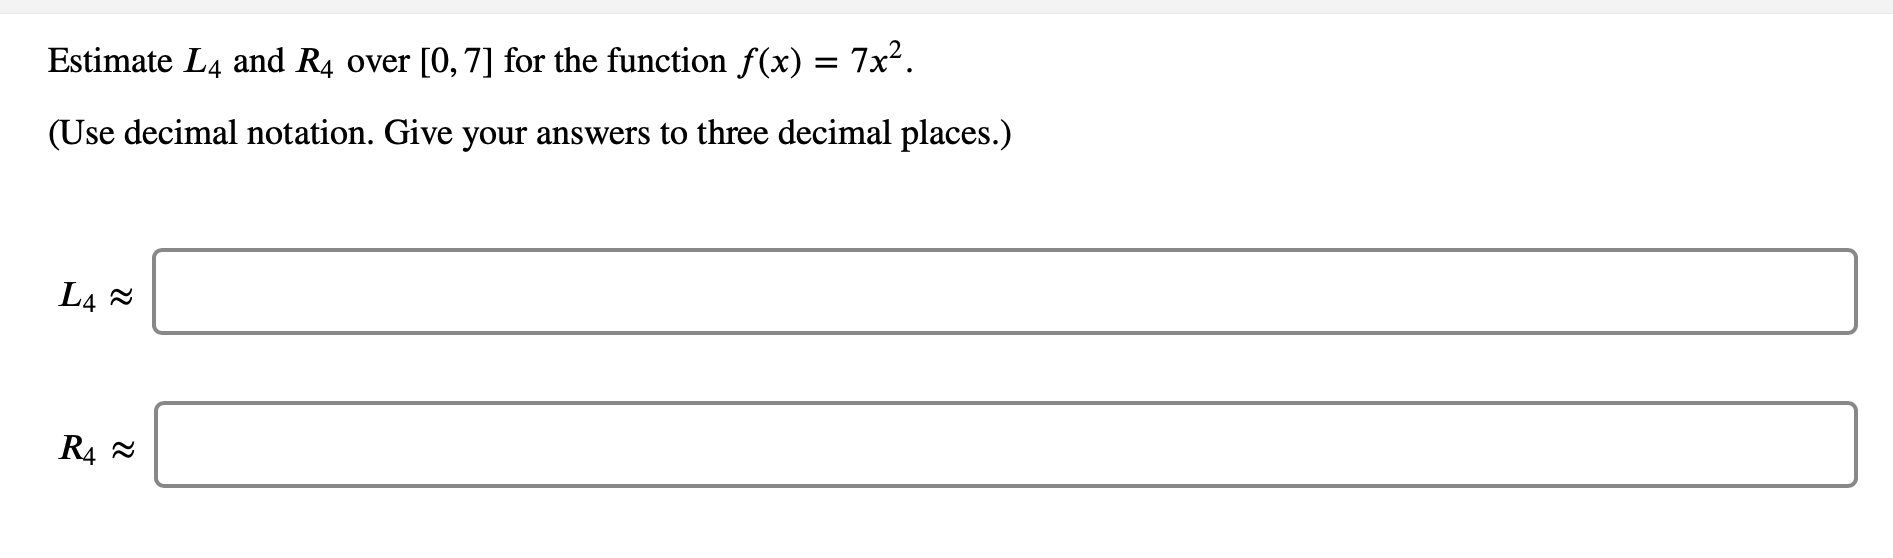 Estimate L4 and R4 over [0,7] for the function f(x) = 7x².
(Use decimal notation. Give your answers to three decimal places.)
